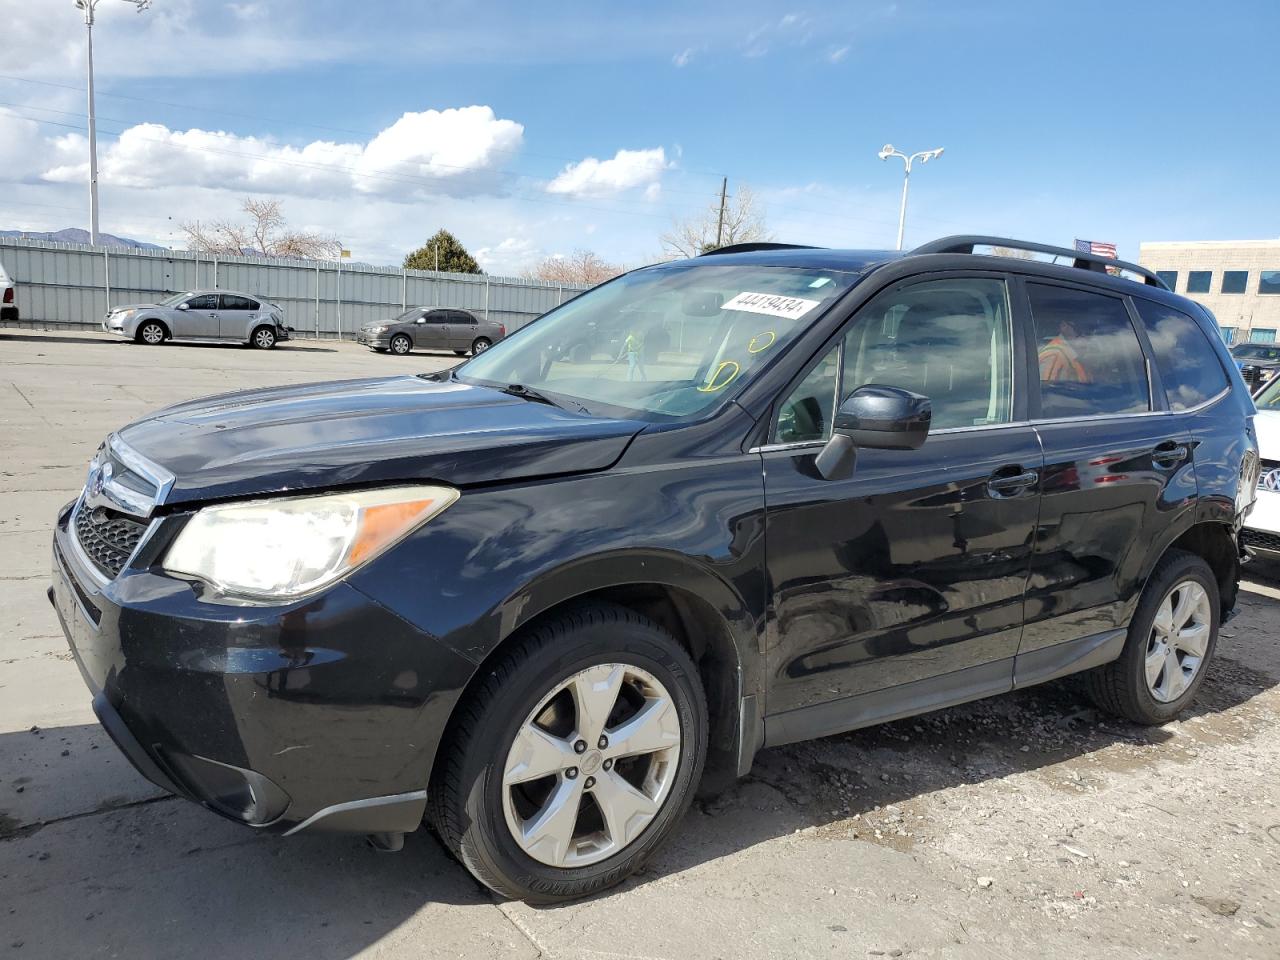 vin: JF2SJAHC1FH466641 JF2SJAHC1FH466641 2015 subaru forester 2500 for Sale in 80125 9741, Co - Denver South, Littleton, USA